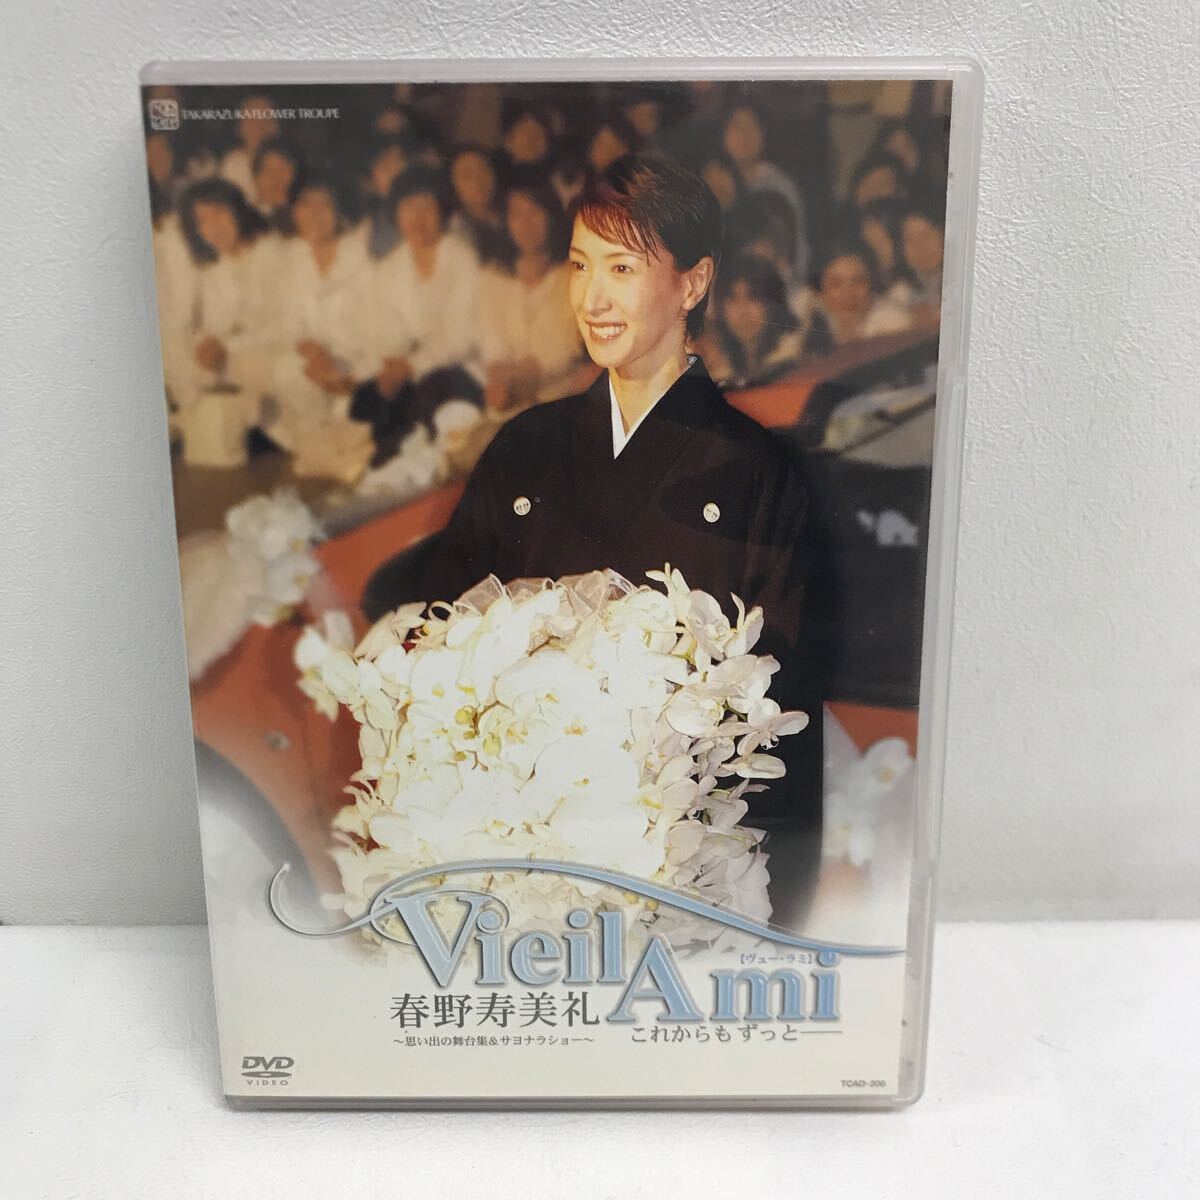 I0504A3 spring .. beautiful .Vieil Ami view lami after this . by far thought .. Mai pcs compilation &sayonala show DVD cell version Takarazuka .. resignation memory musical 